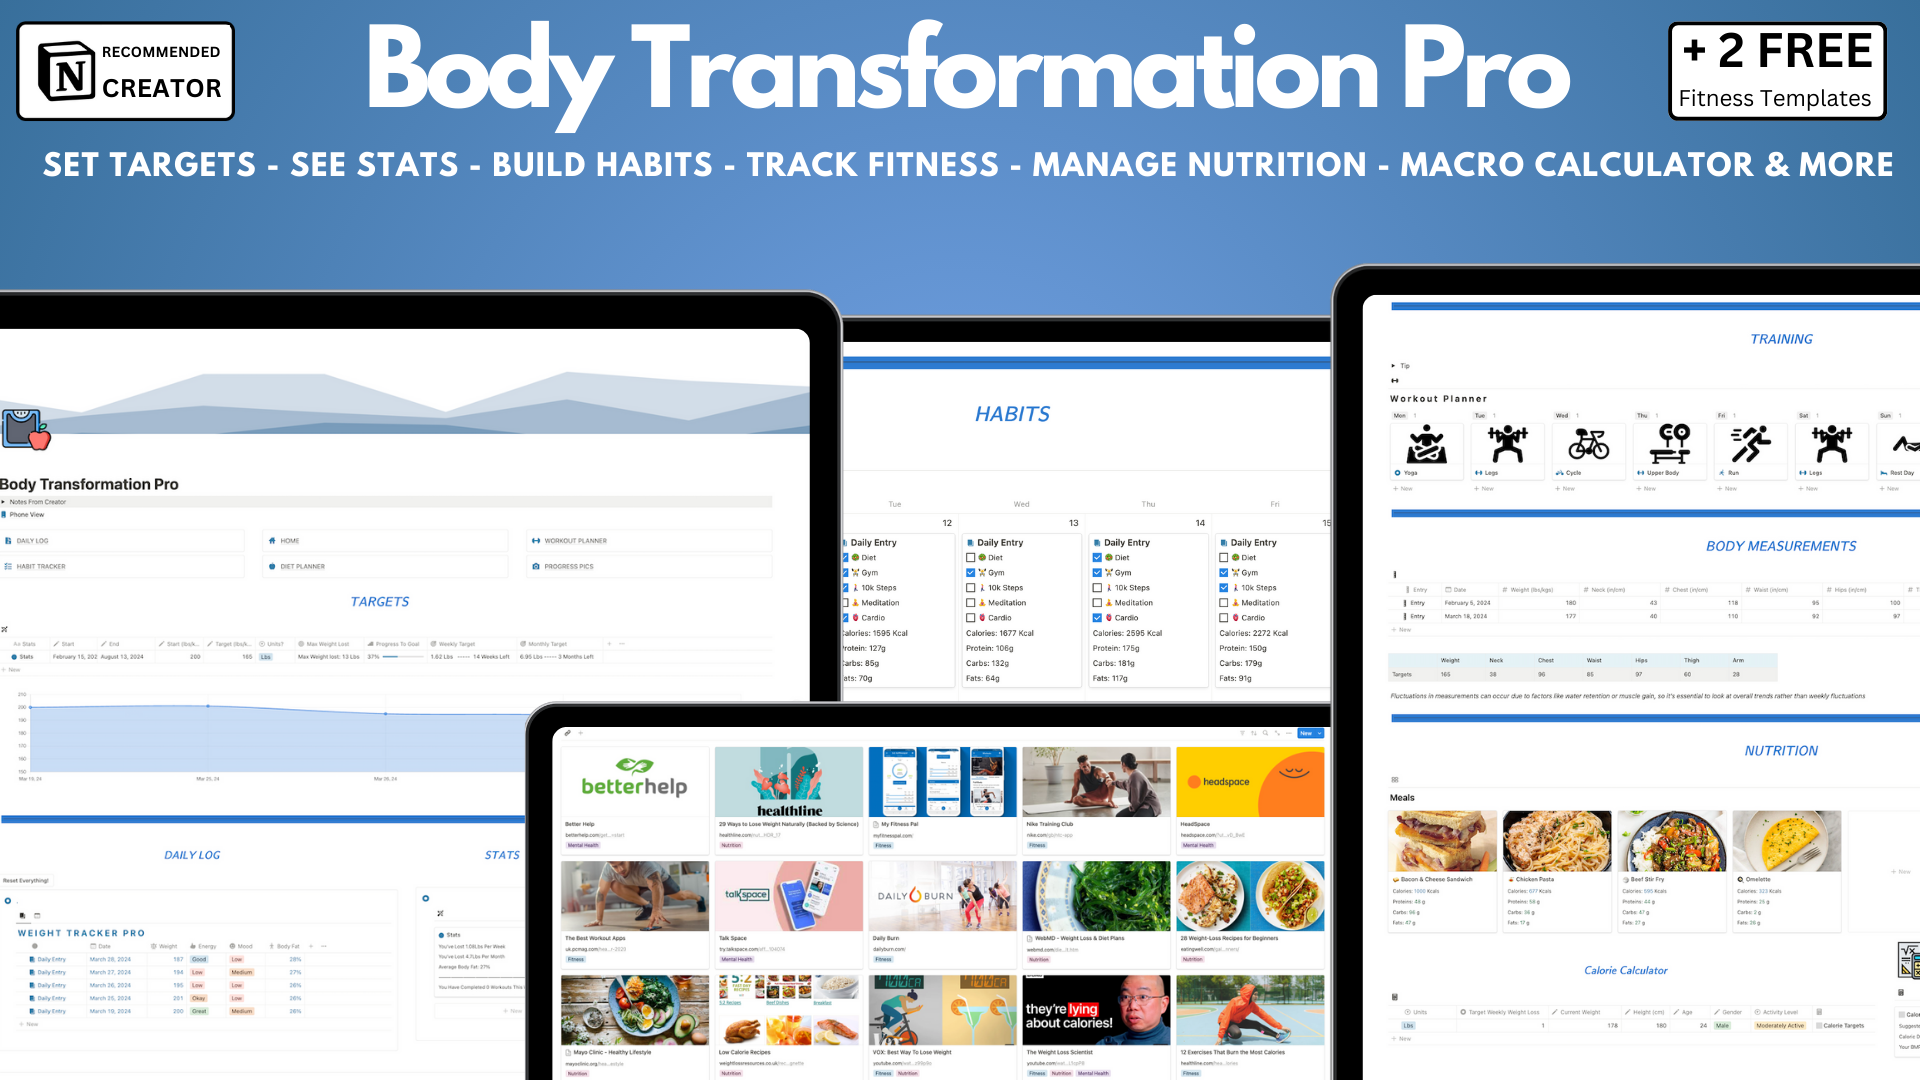 The best tool to achieve transformative weight loss. Set weight targets, track progress, manage nutrition, build habits, meal plan, phone view, fitness workouts, online resources, body measurements, 2 free gifts, a money-back guarantee, lifetime improvements & more! 